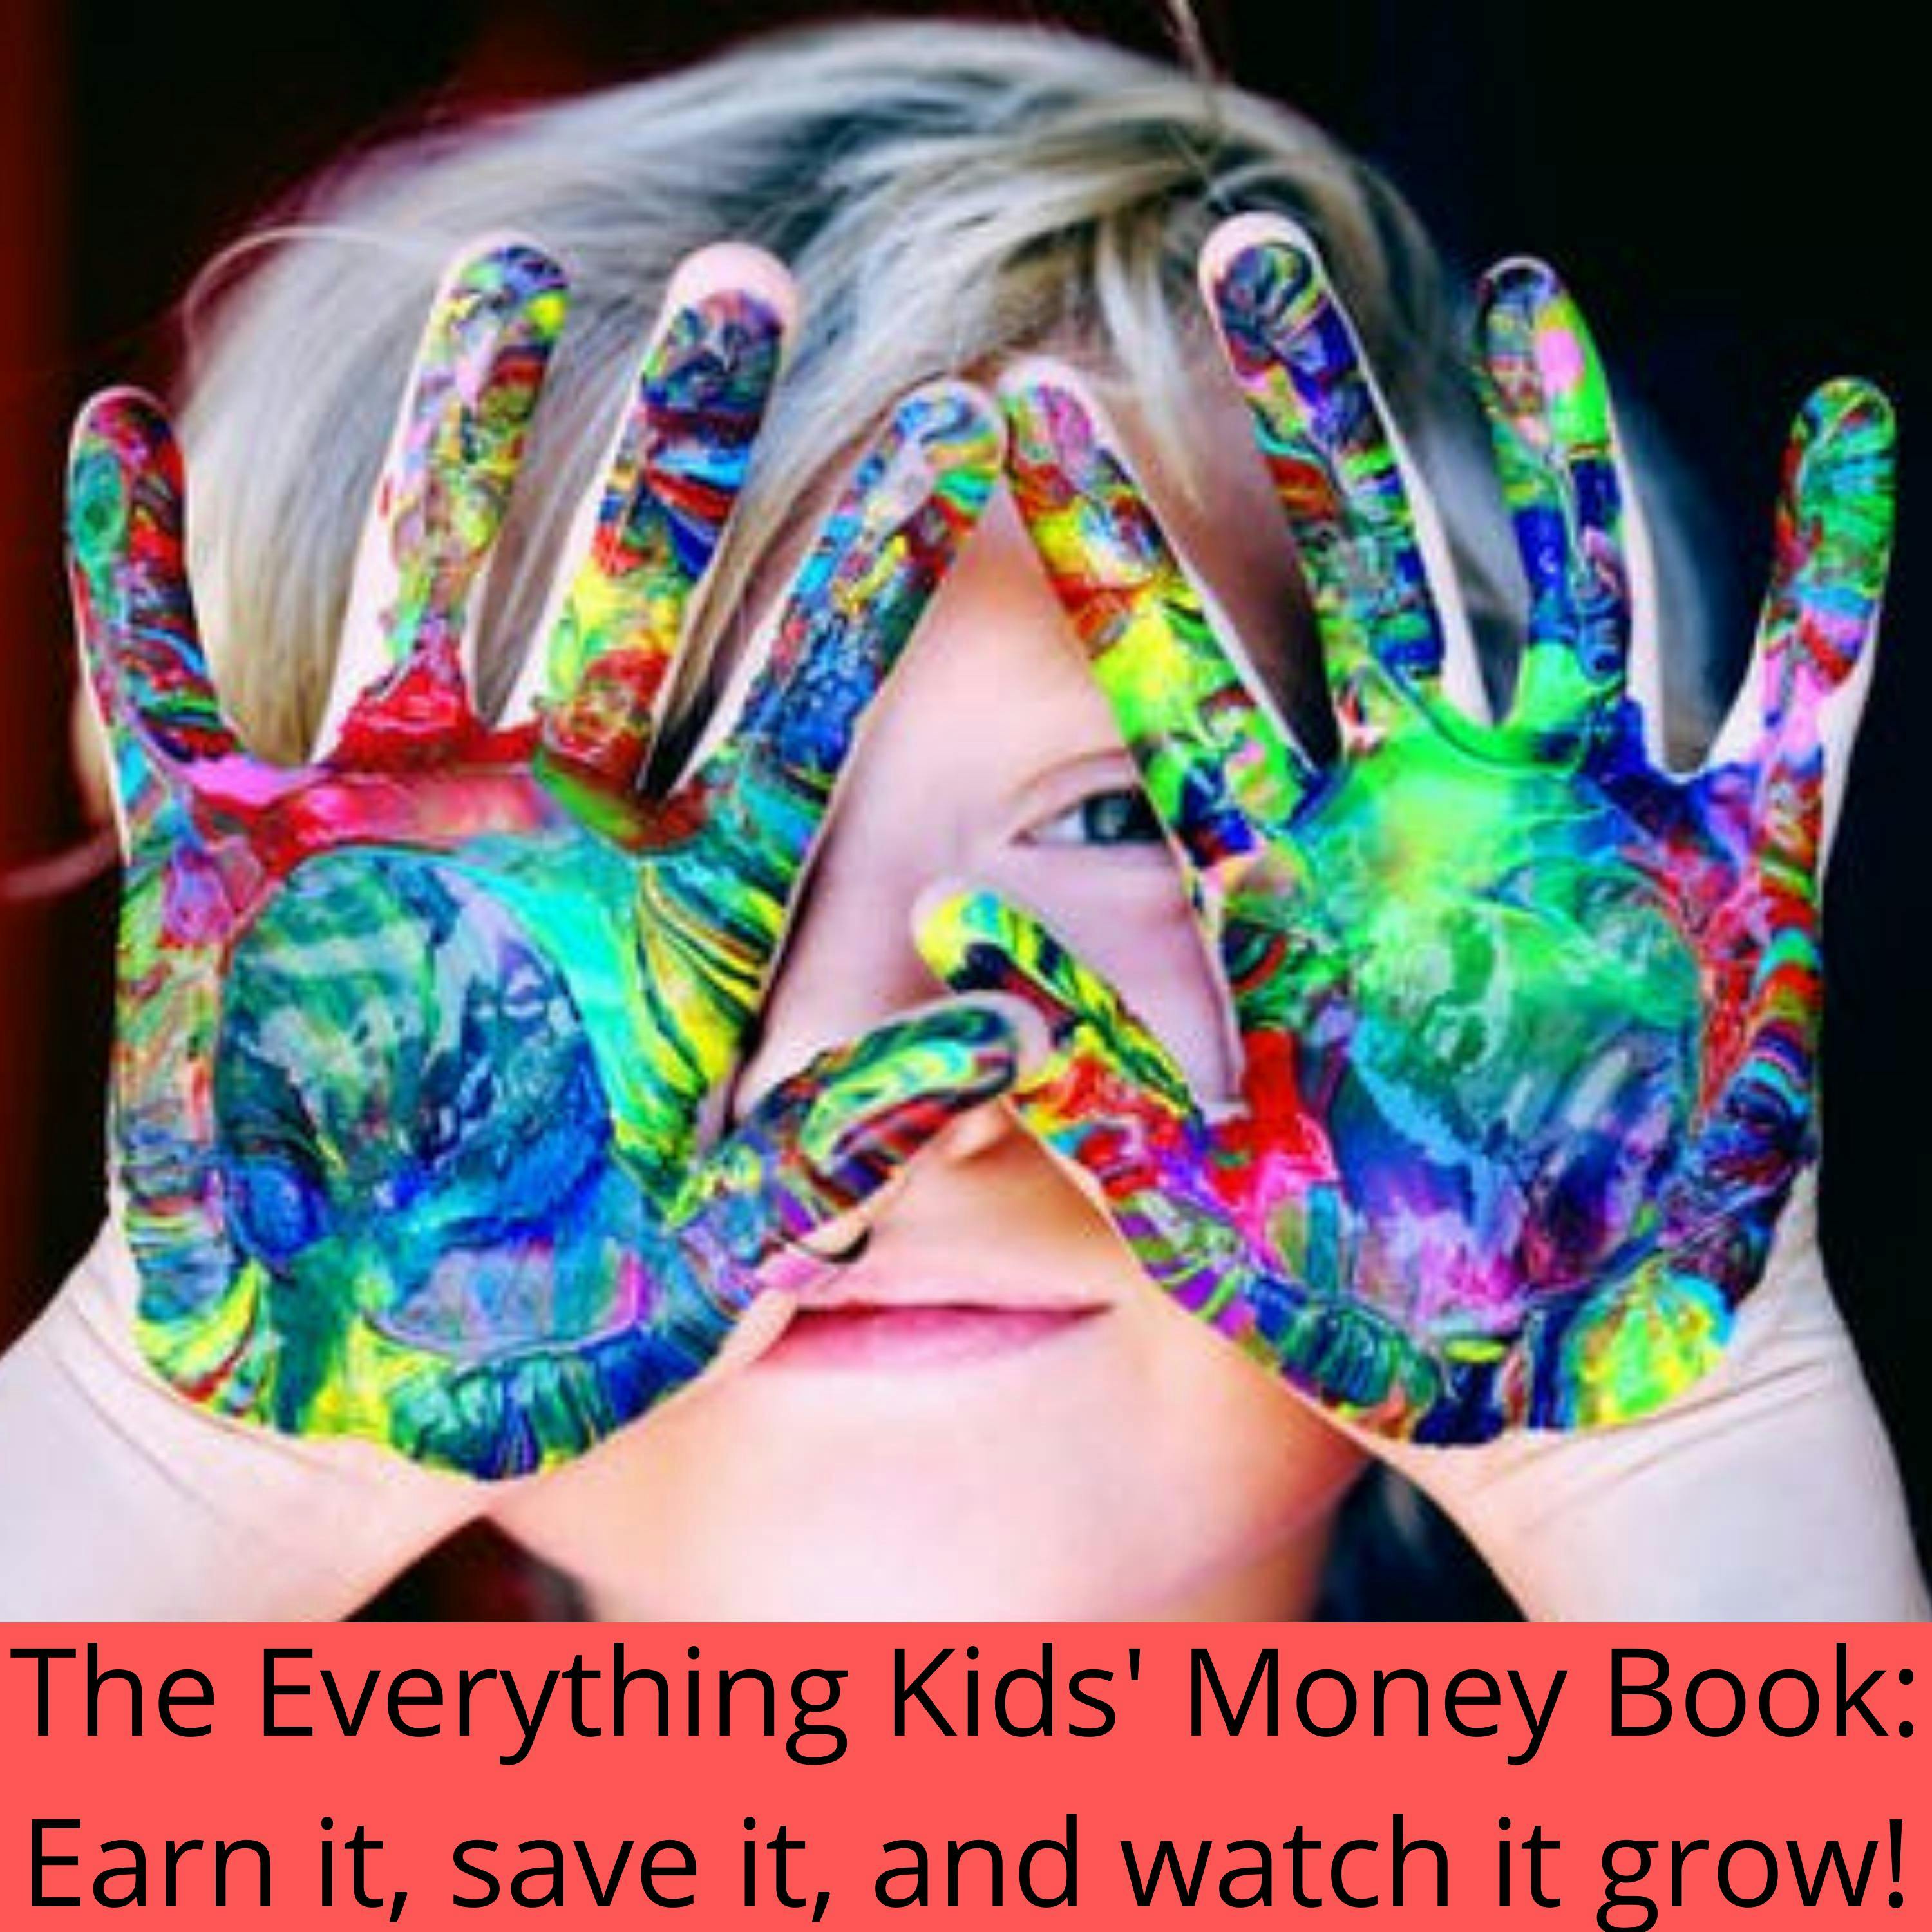 The Everything Kids' Money Book: Earn it, save it, and watch it grow! - Brette Sember